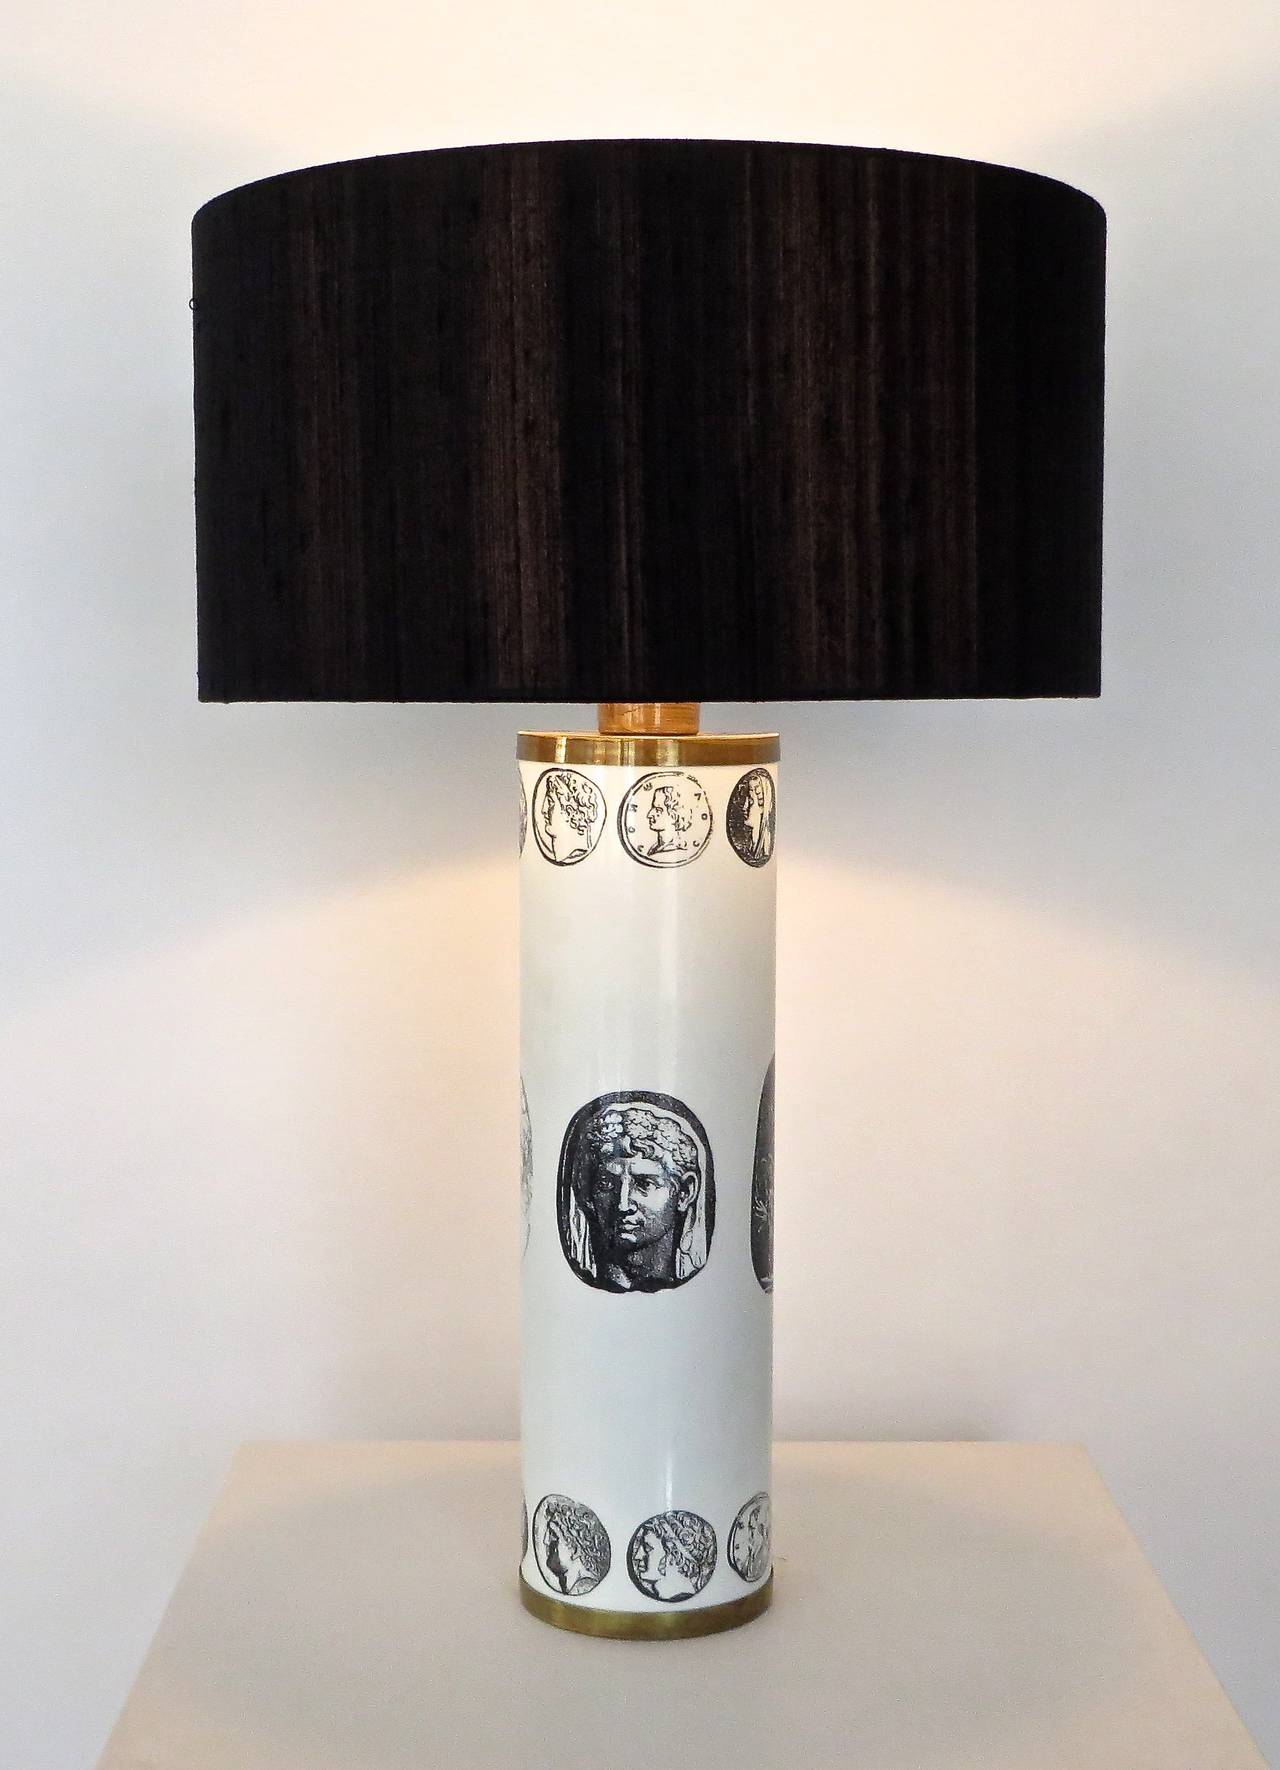 Piero Fornasetti enameled table lamp in white with black transfer printed lithographic cameos of emperors with brass details in beautiful condition. Signed with early label. 
Shown with black linen shade: 7.5